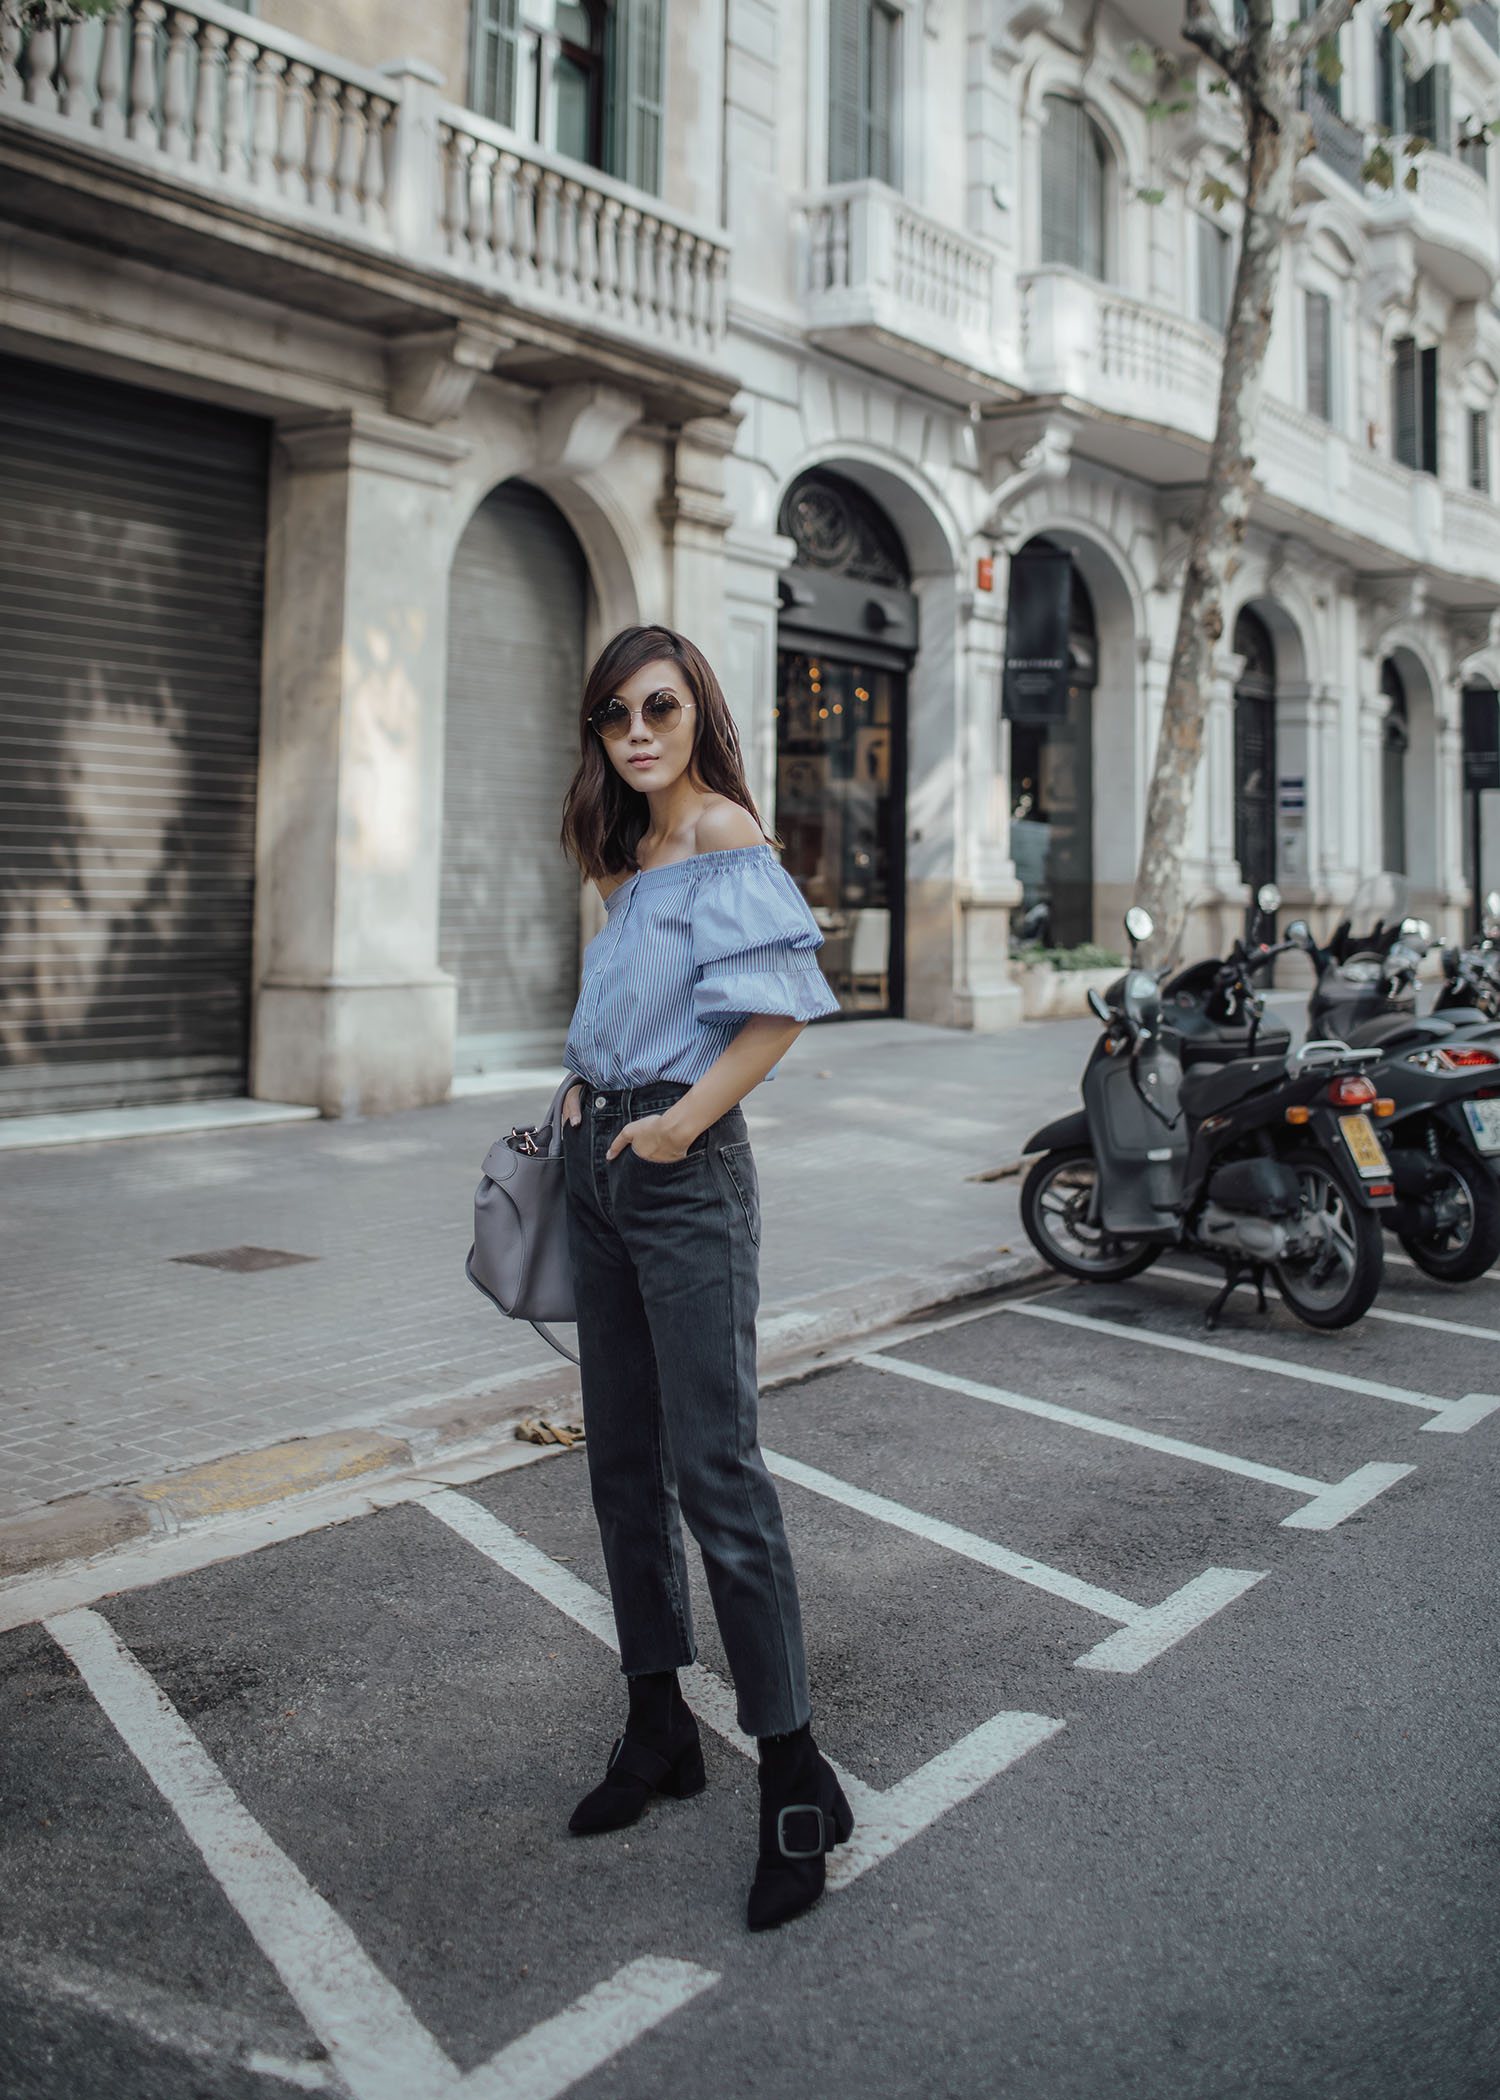 Lifestyle fashion travel blogger Jenny Tsang of Tsangtastic wearing off shoulder ruffle sleeve top and re/done levis jeans and roger vivier leather bag in Barcelona Spain.